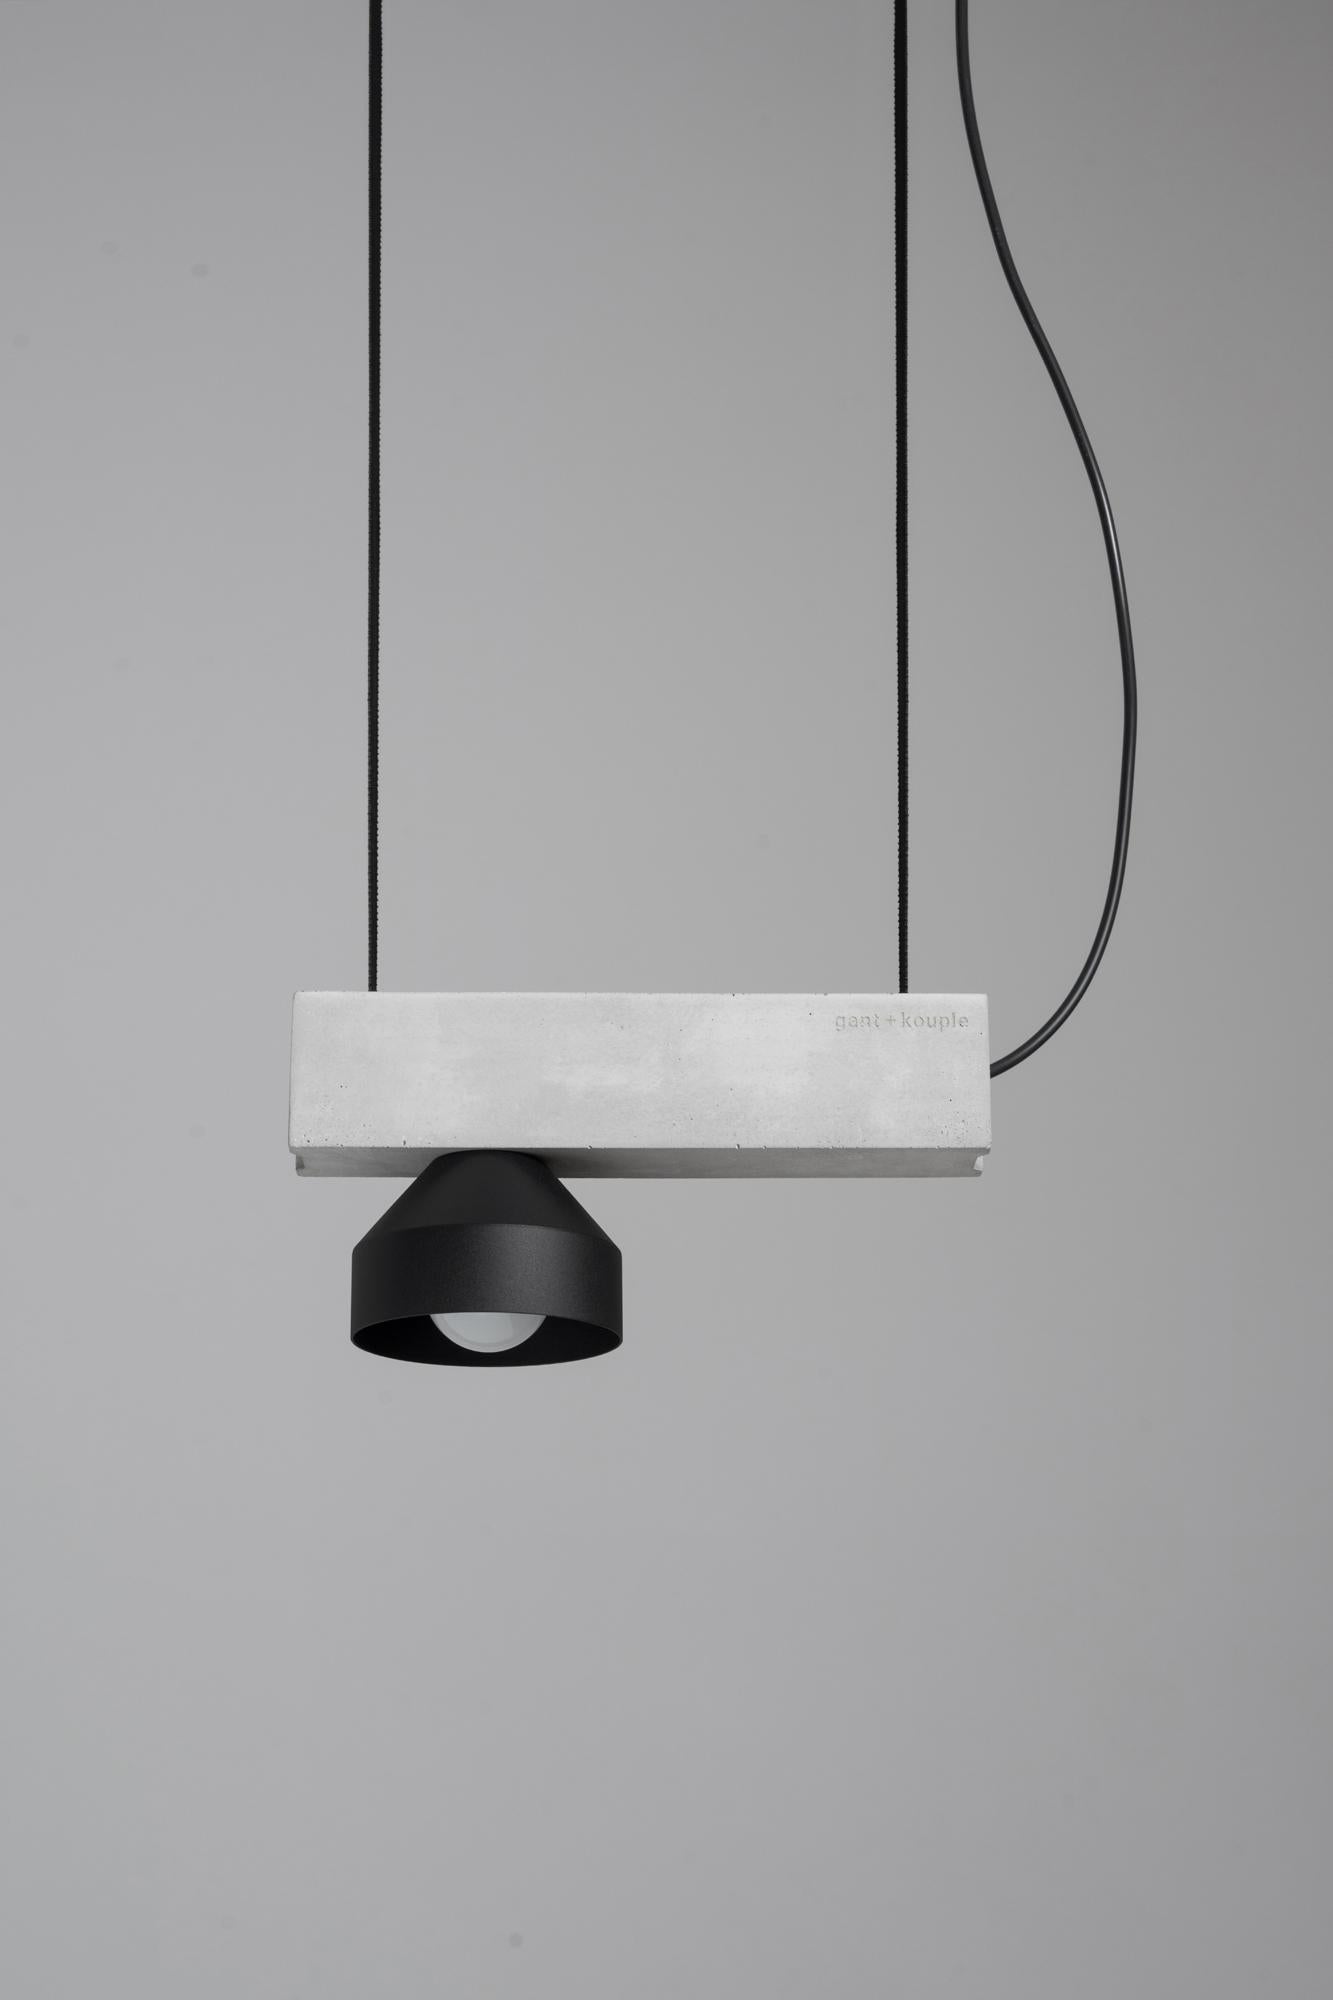 Black Block Pendant Lamp by +kouple
Dimensions: D 26 x W 10 x H 12,7 cm.
Materials: Concrete, powder-coated steel and textile. 

Available in different color options. Please contact us.

All our lamps can be wired according to each country. If sold